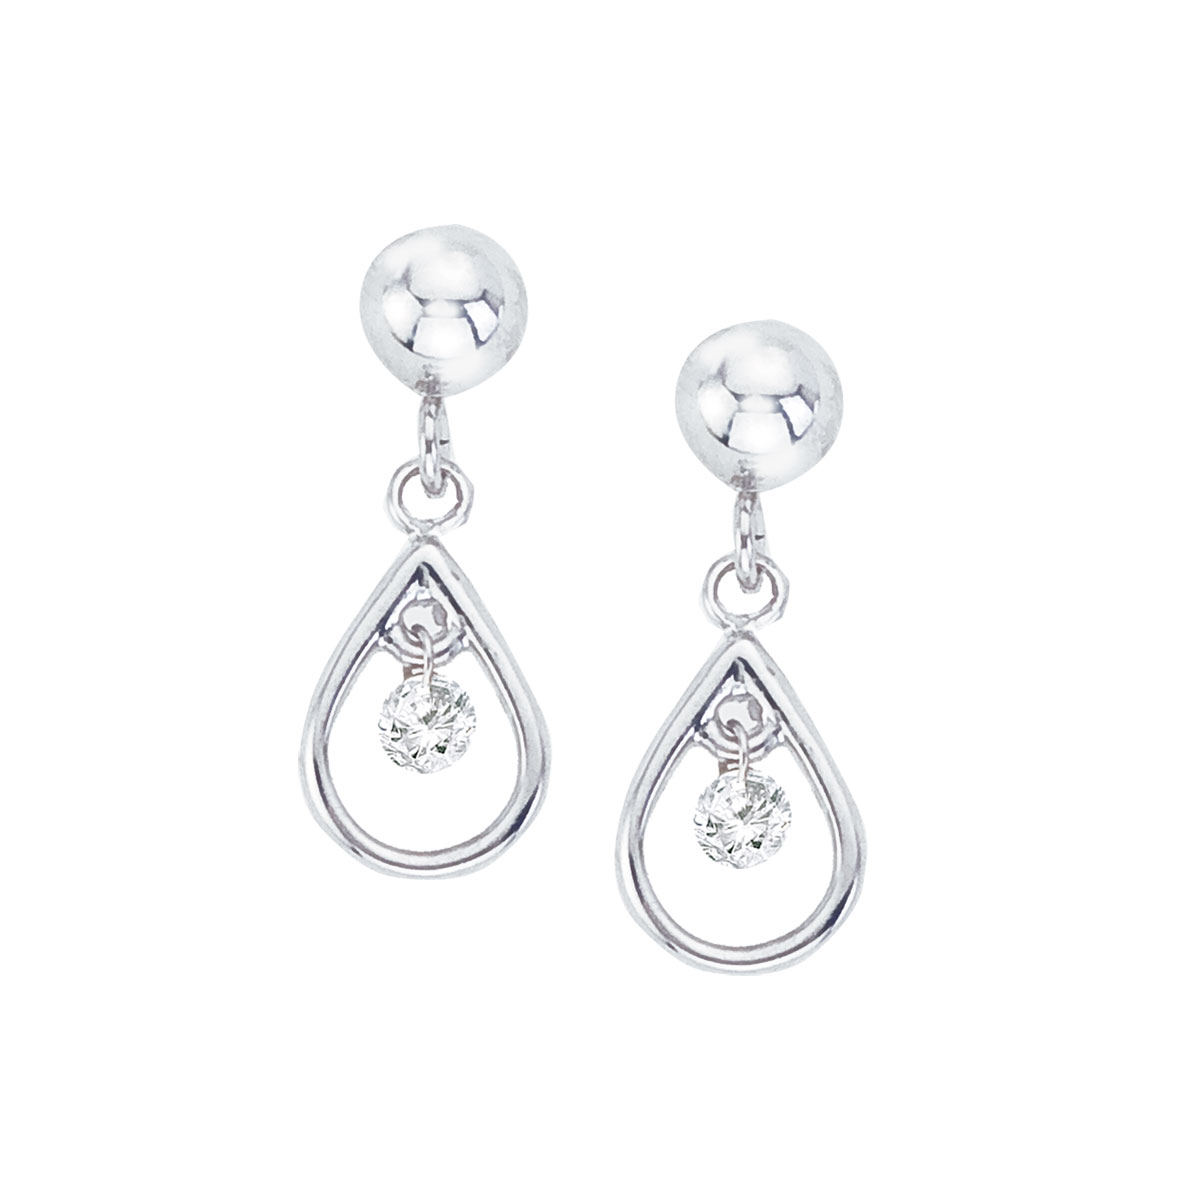 JCX2488: 10k white gold Dashing Diamonds dangle earrings with shimmering stones that dance with every heartbeat for a beautiful and bright look.